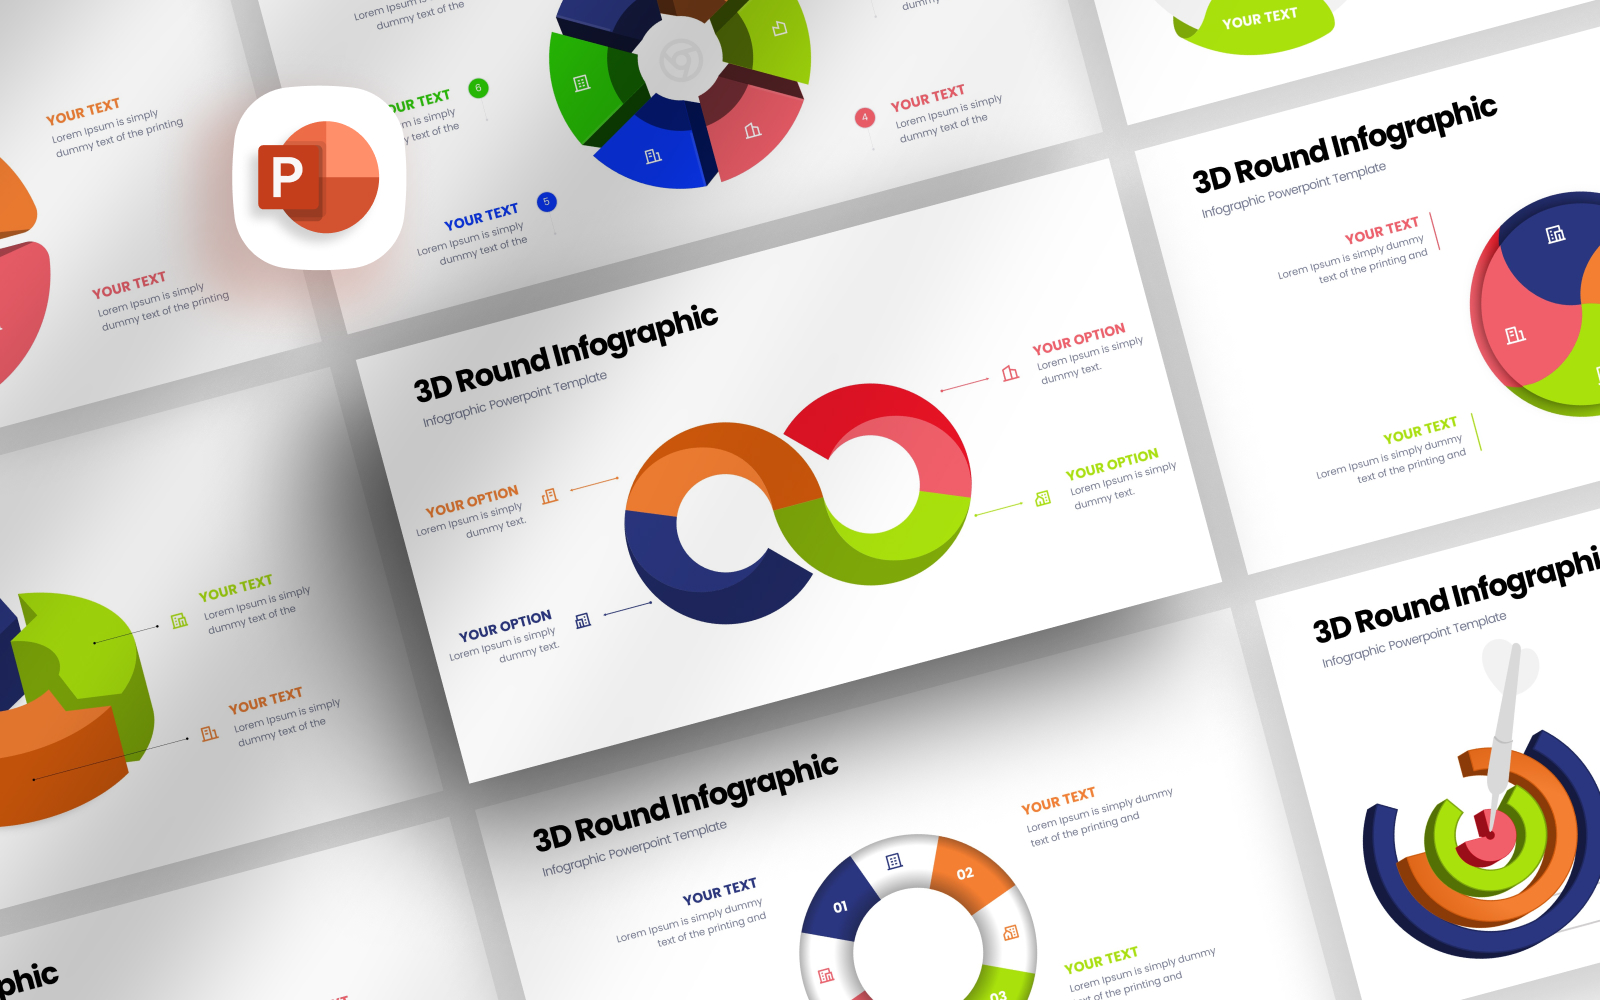 3D Round Infographic Presentation Template